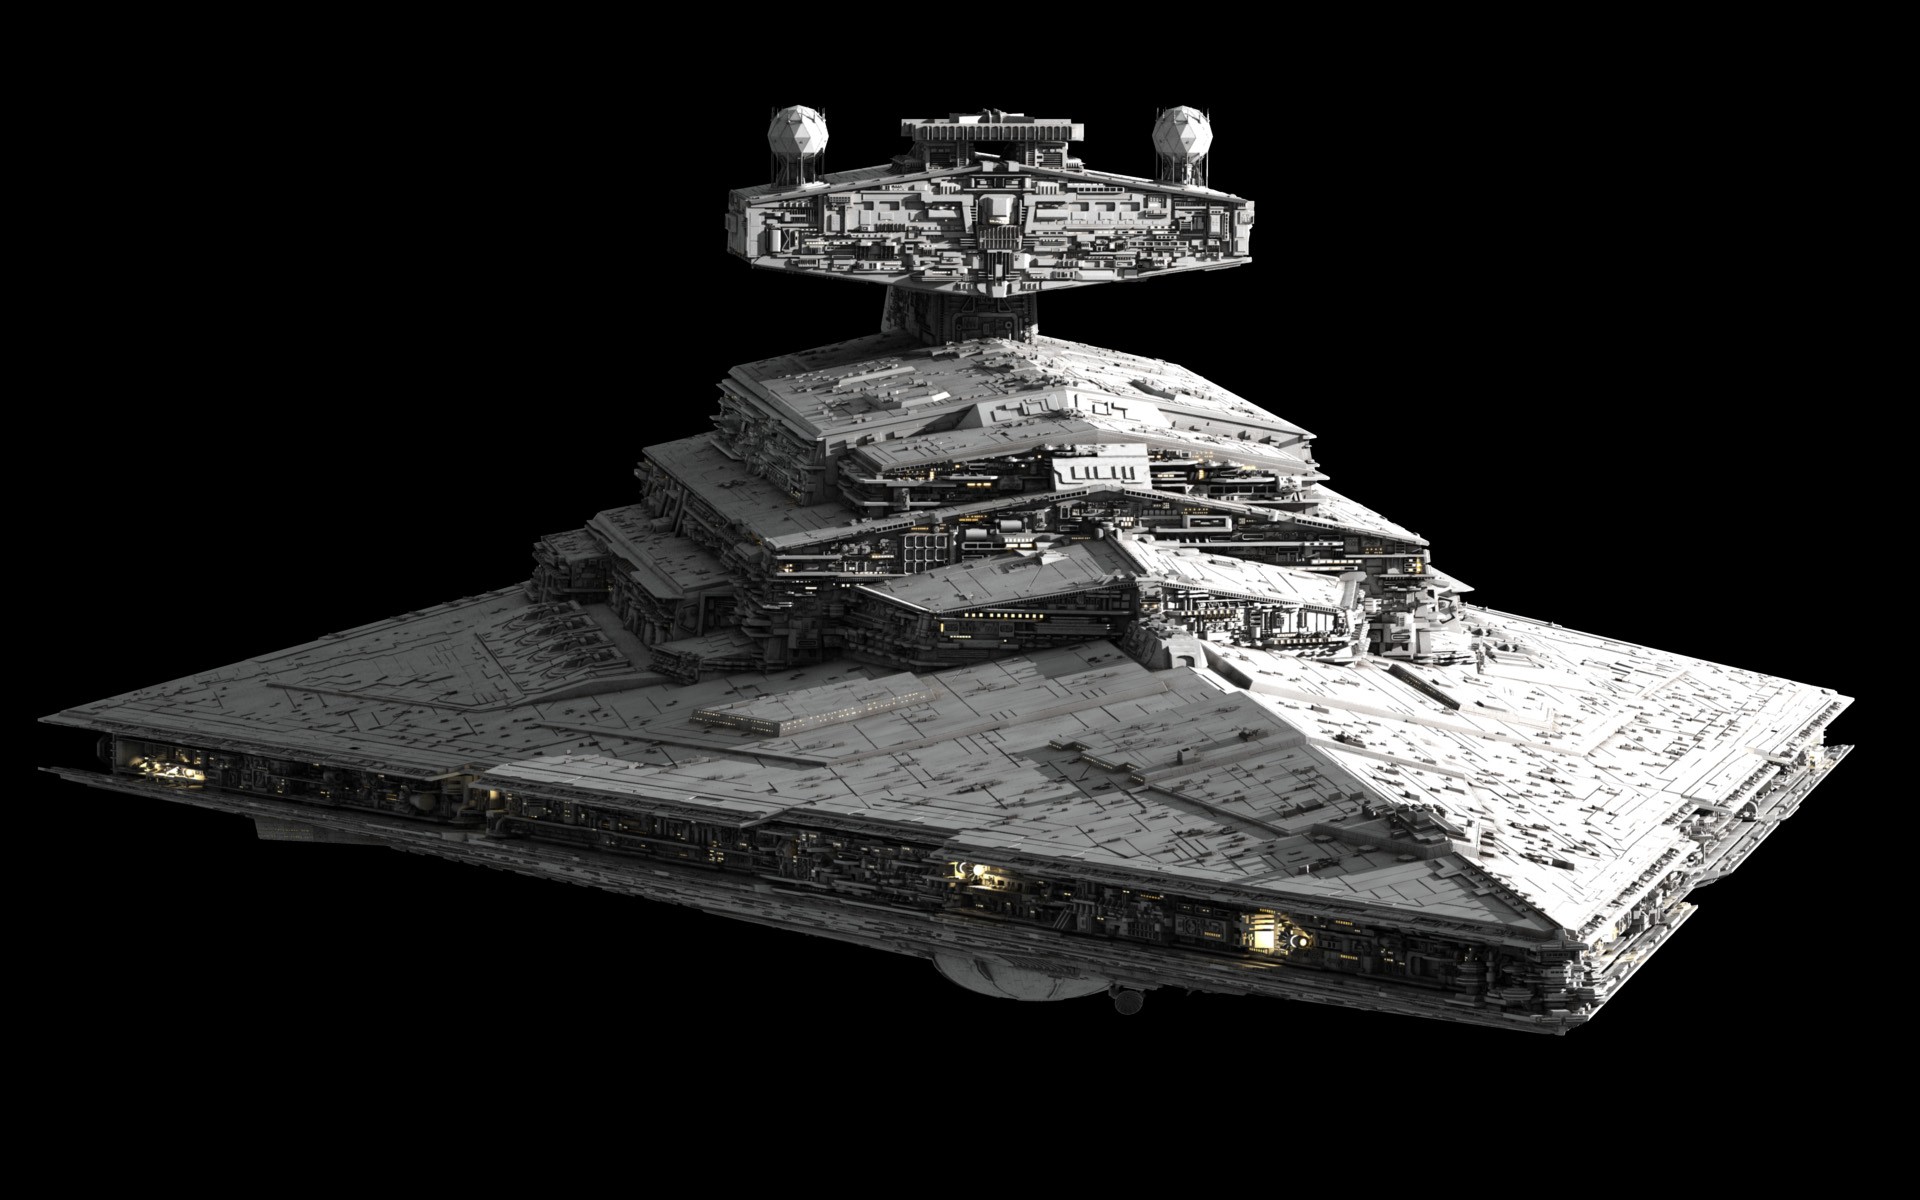 Star Wars Spaceship Star Destroyer Science Fiction Imperial Forces Star Wars Ships 1920x1200